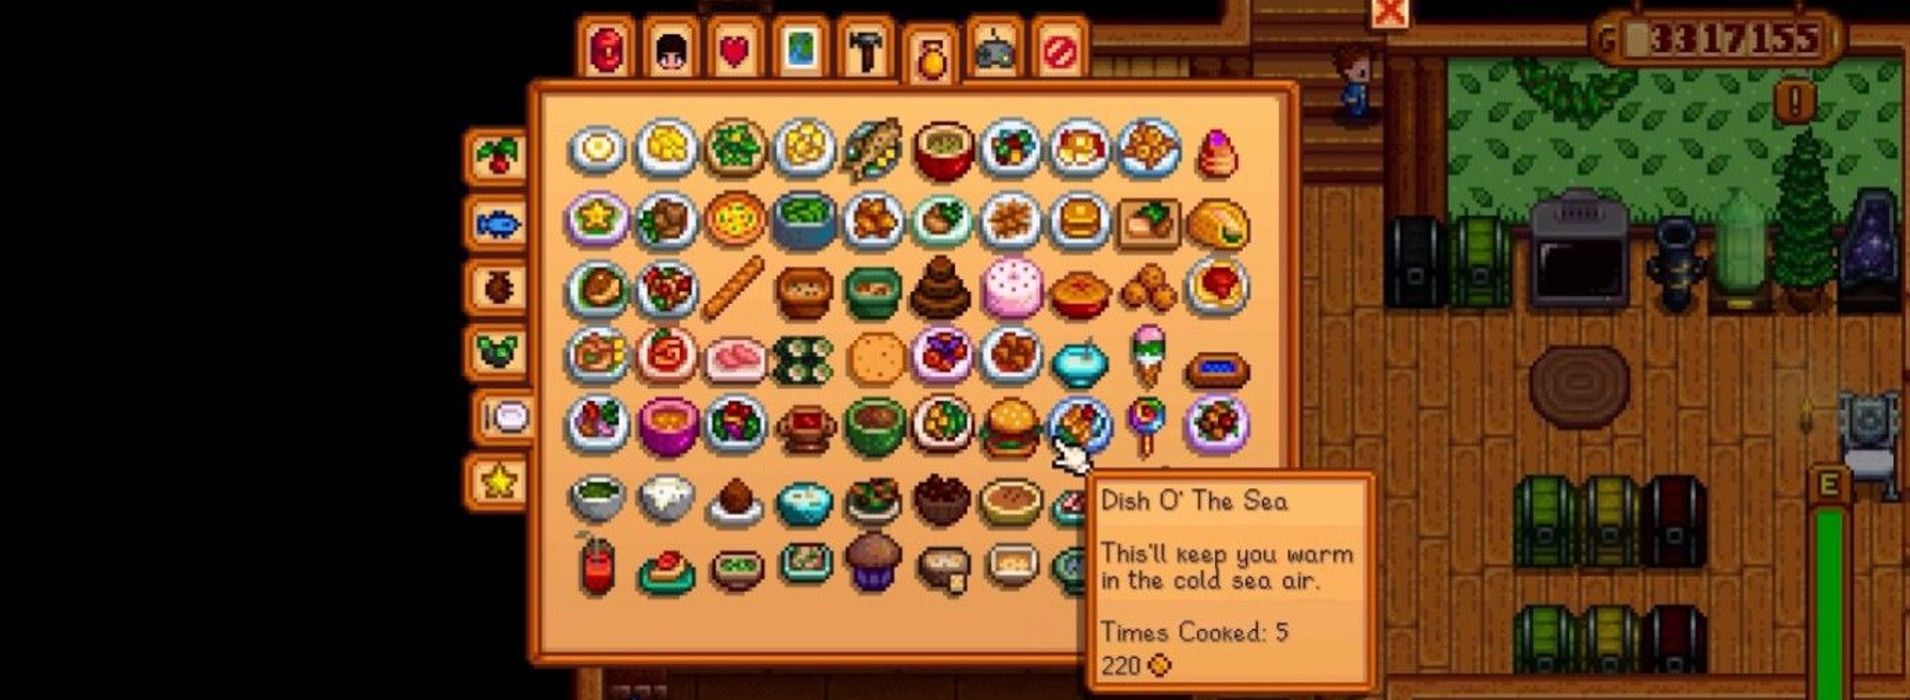 stardew-valley-every-meal-recipe-and-how-to-get-it